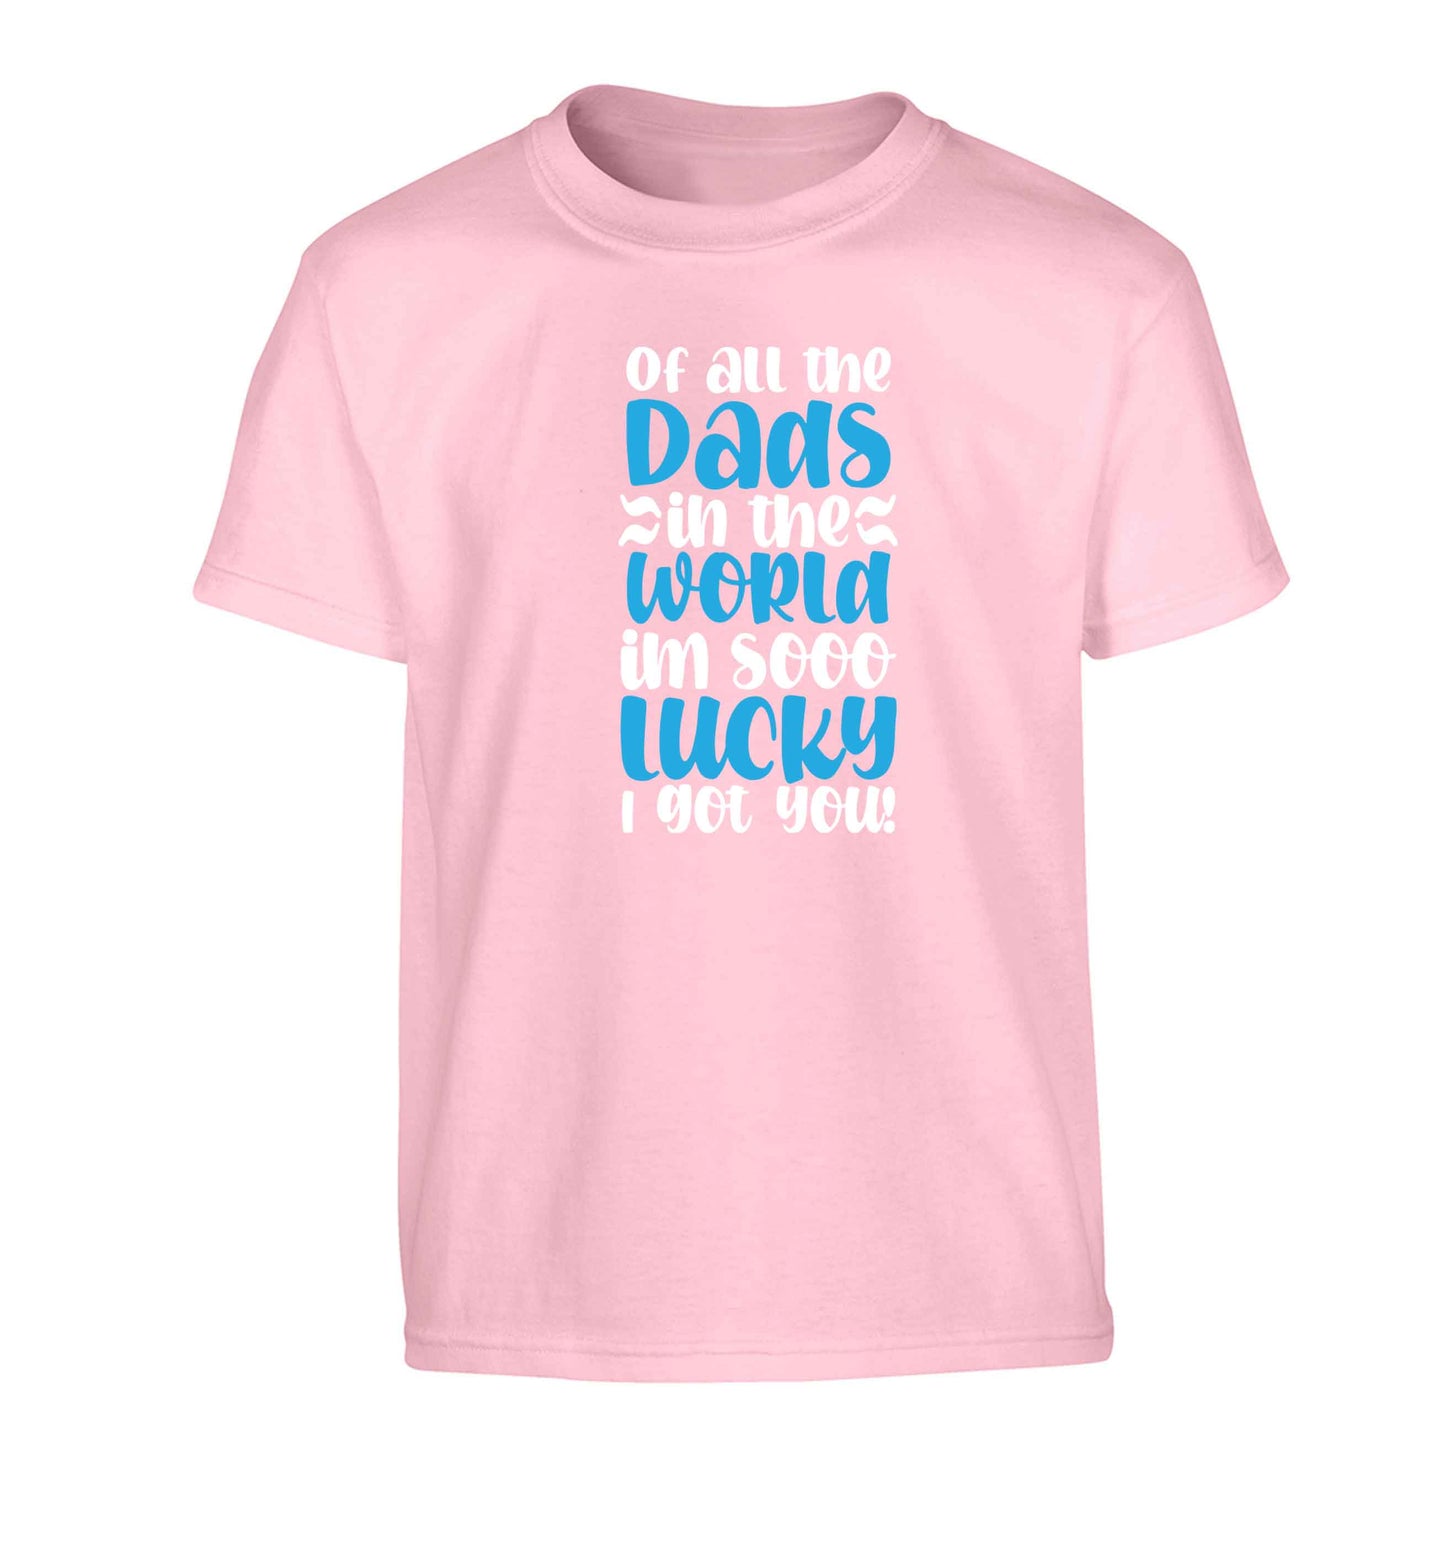 Of all the Dads in the world I'm so lucky I got you Children's light pink Tshirt 12-13 Years